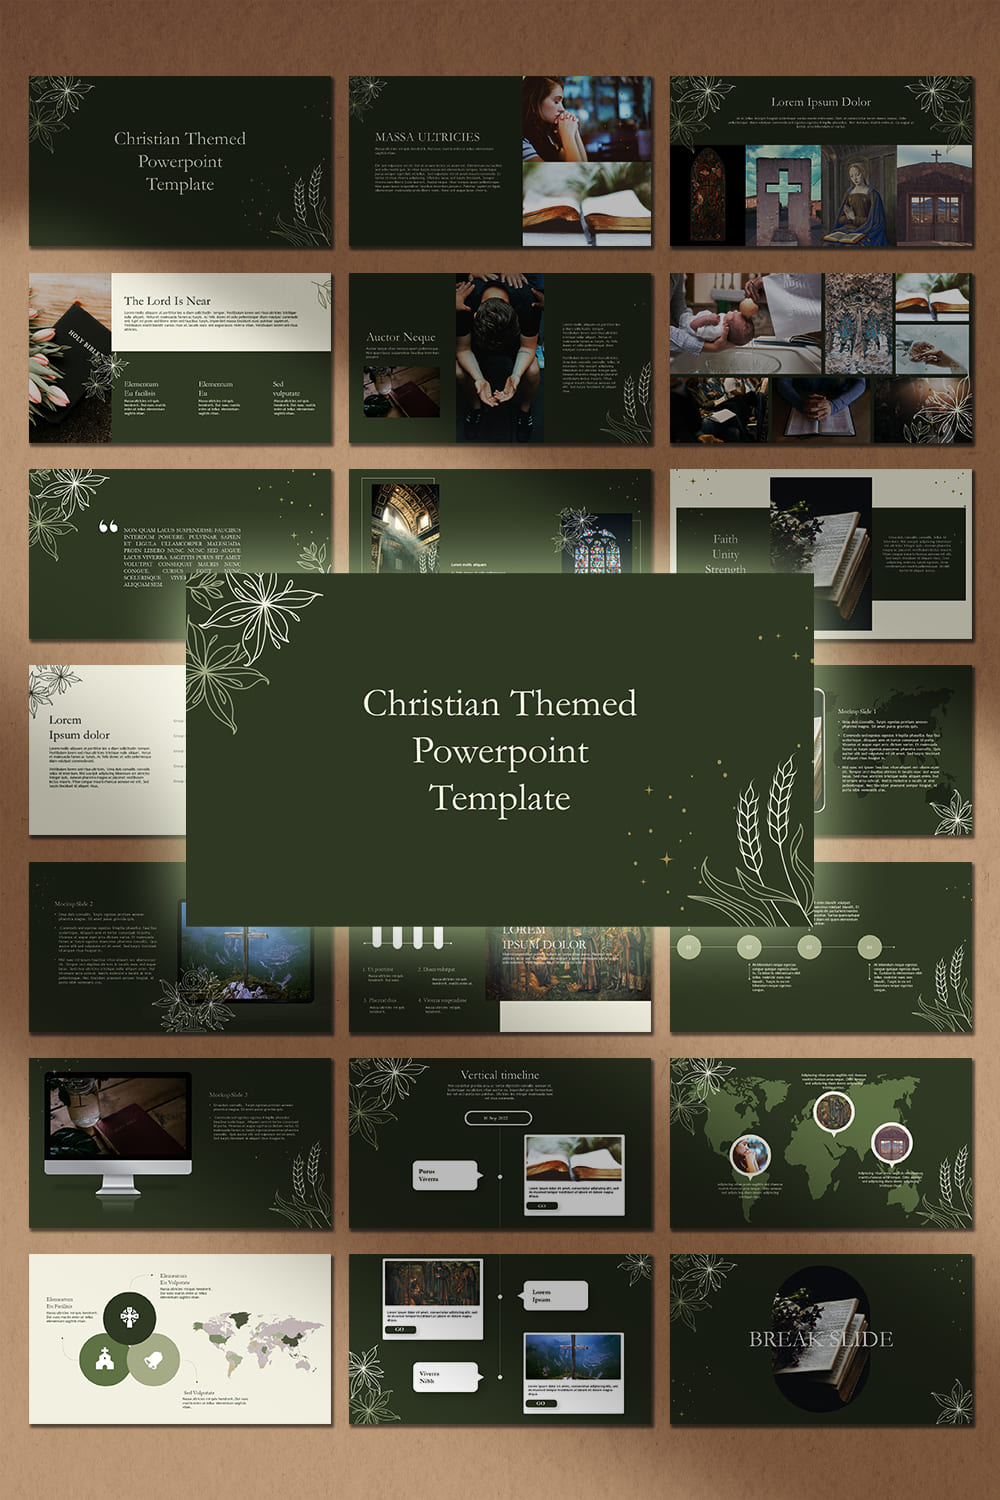 Christian themed powerpoint template, picture 1000x1500 for Pinterest.